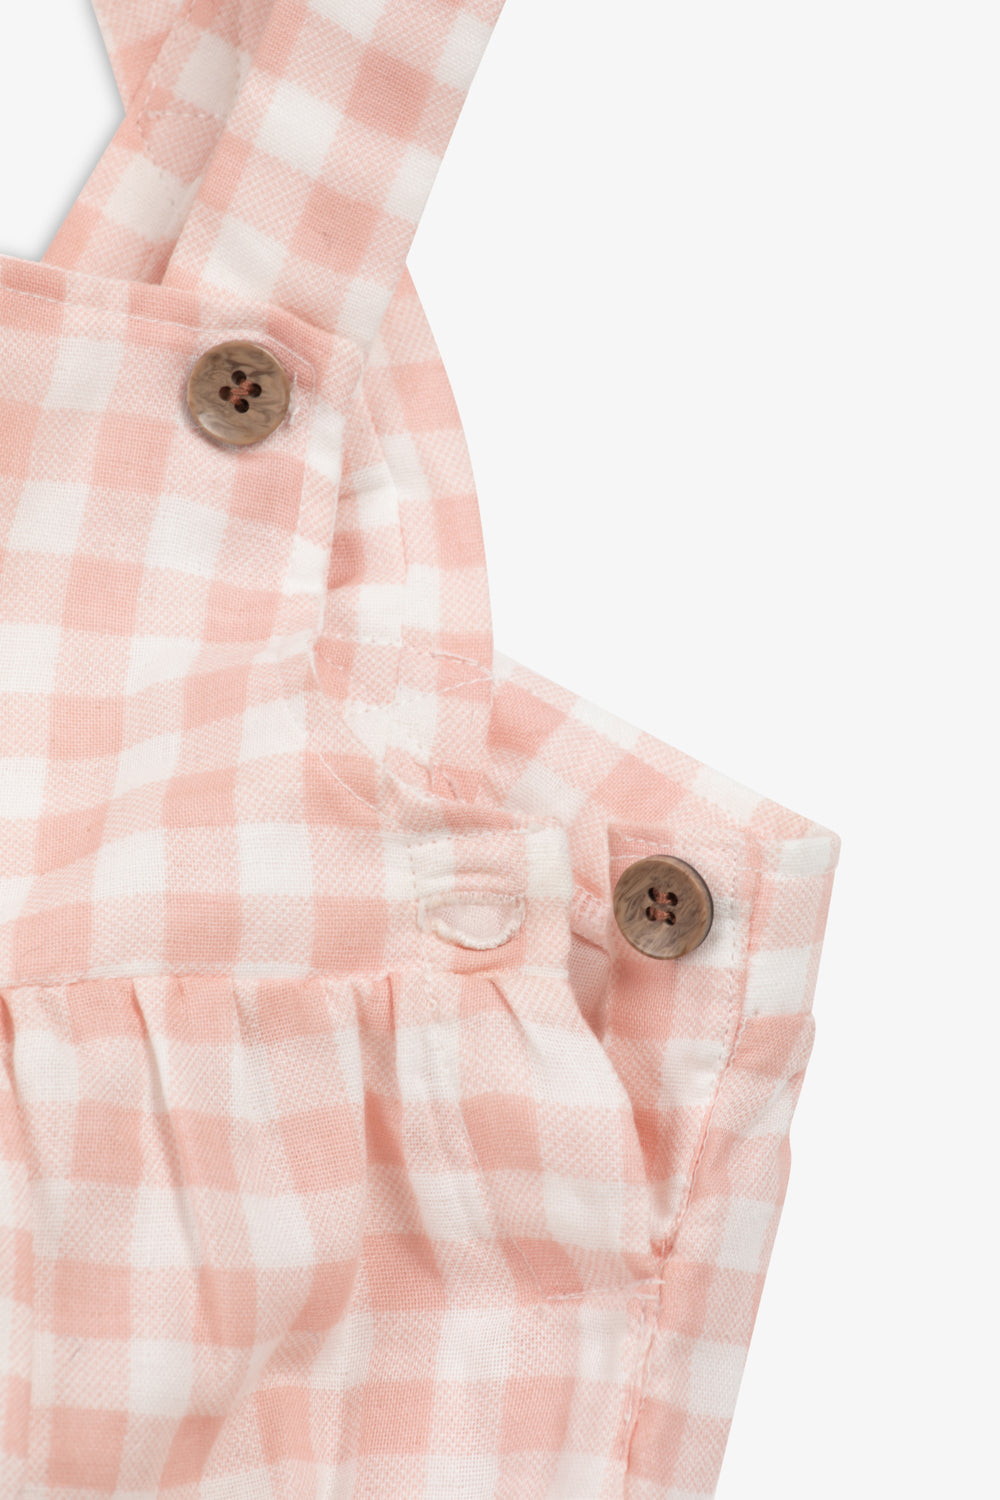 Cotton Shorty Dungaree/Body, rose gingham print